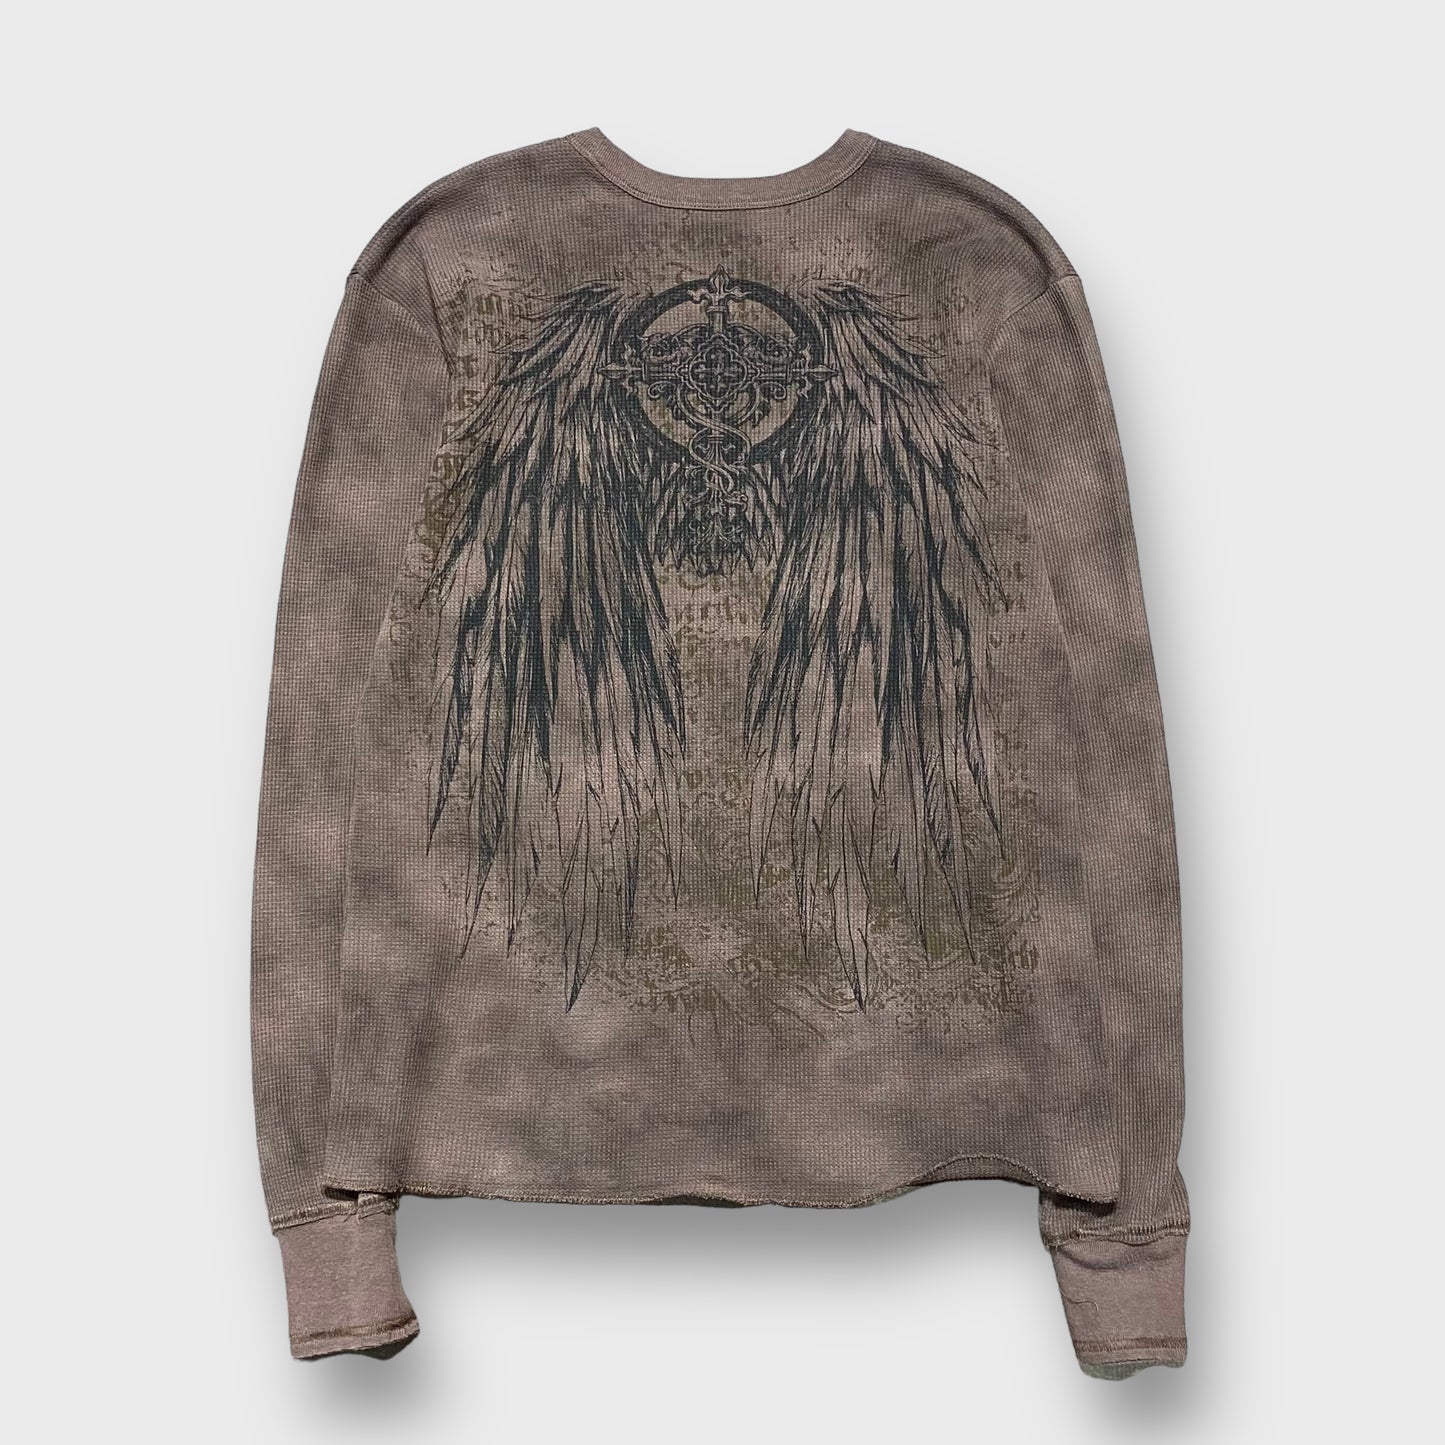 Wing design thermal knit sweater